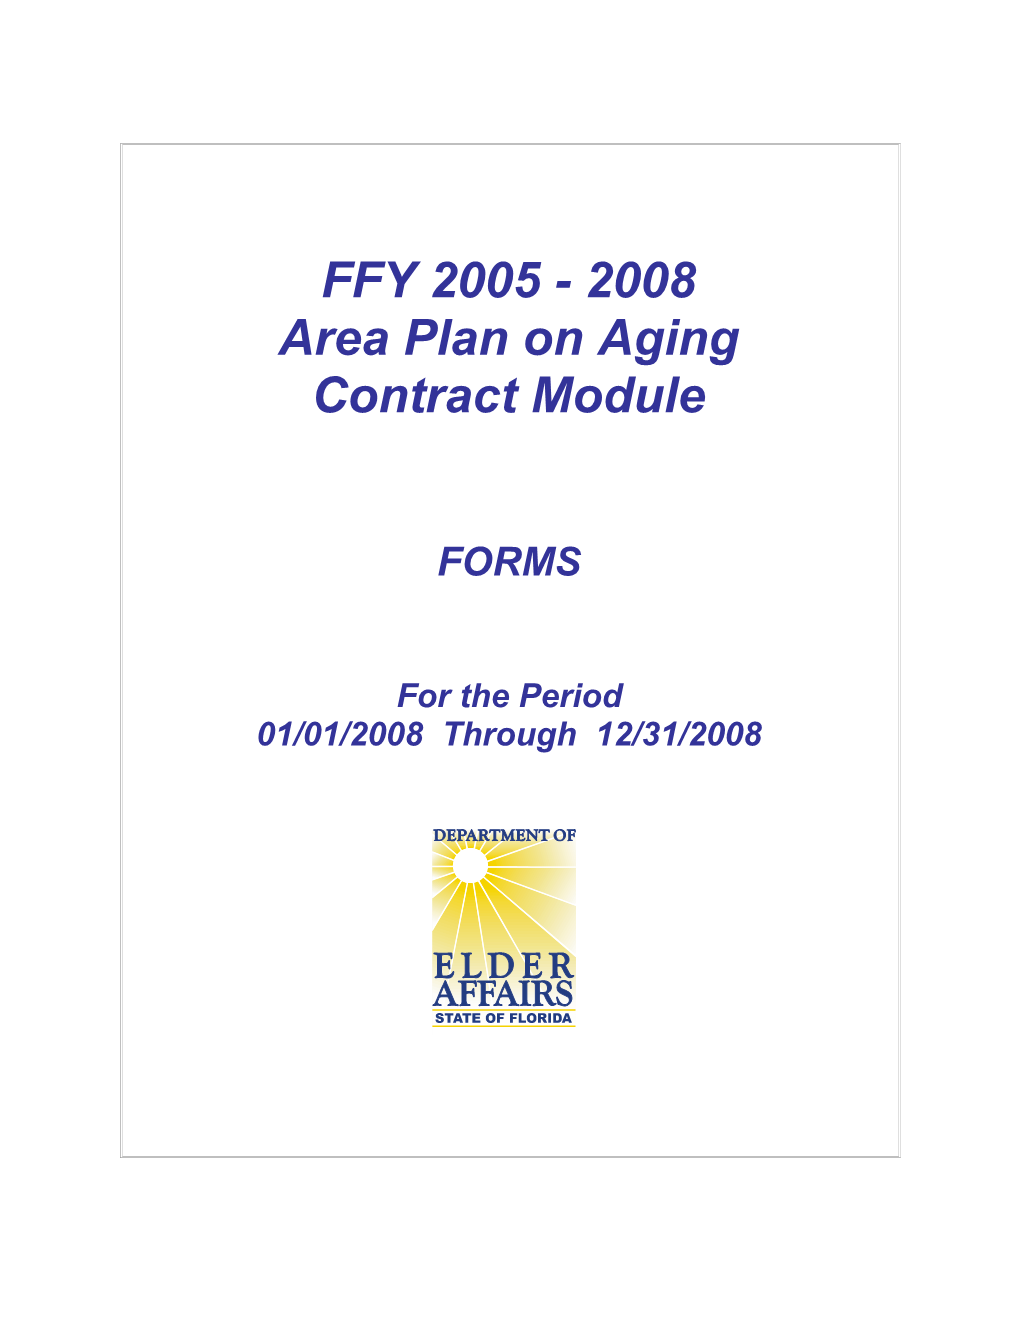 Area Plan on Aging